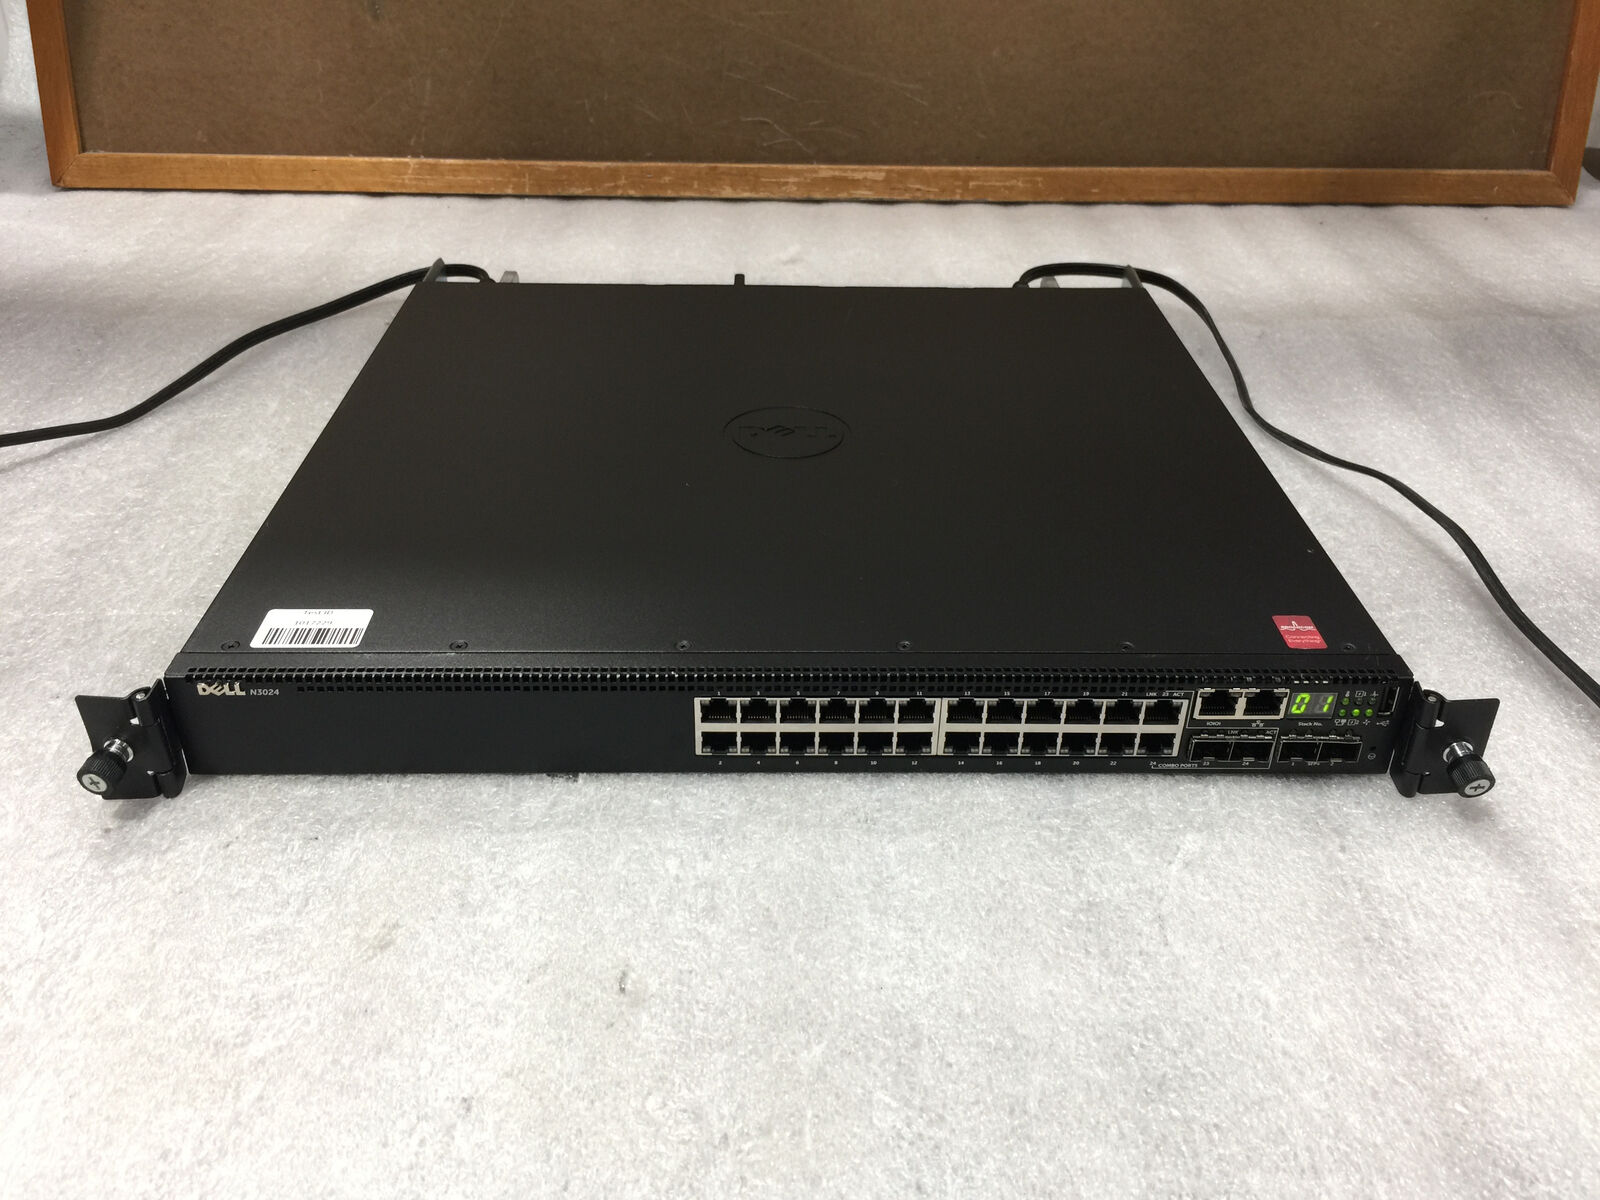 Dell Networking N3024 24 Port Rack Mountable Ethernet Switch, Factory Reset